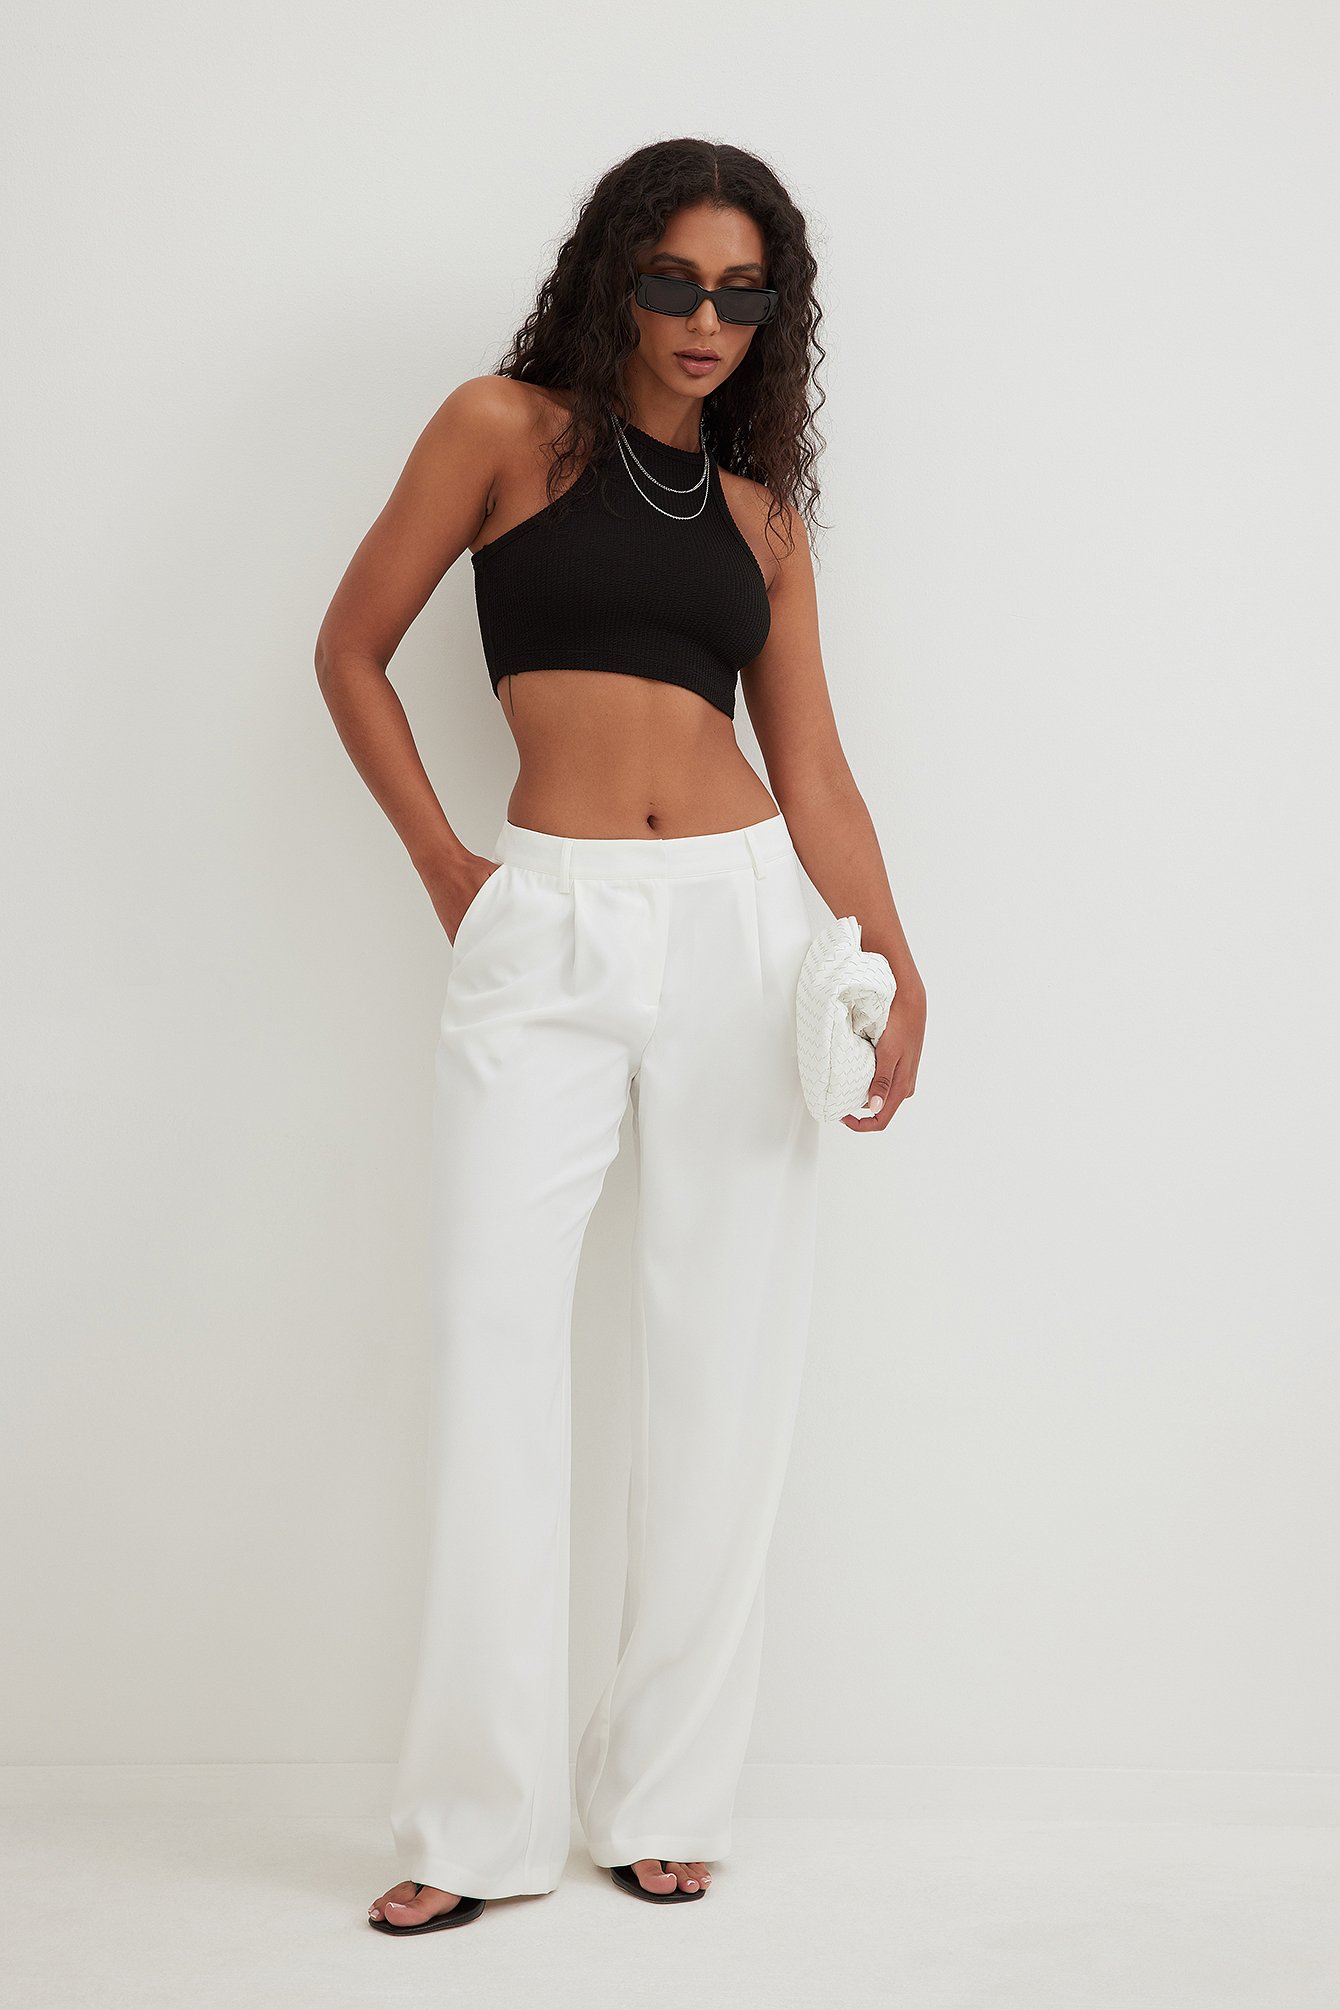 Textured Cropped Top Outfit